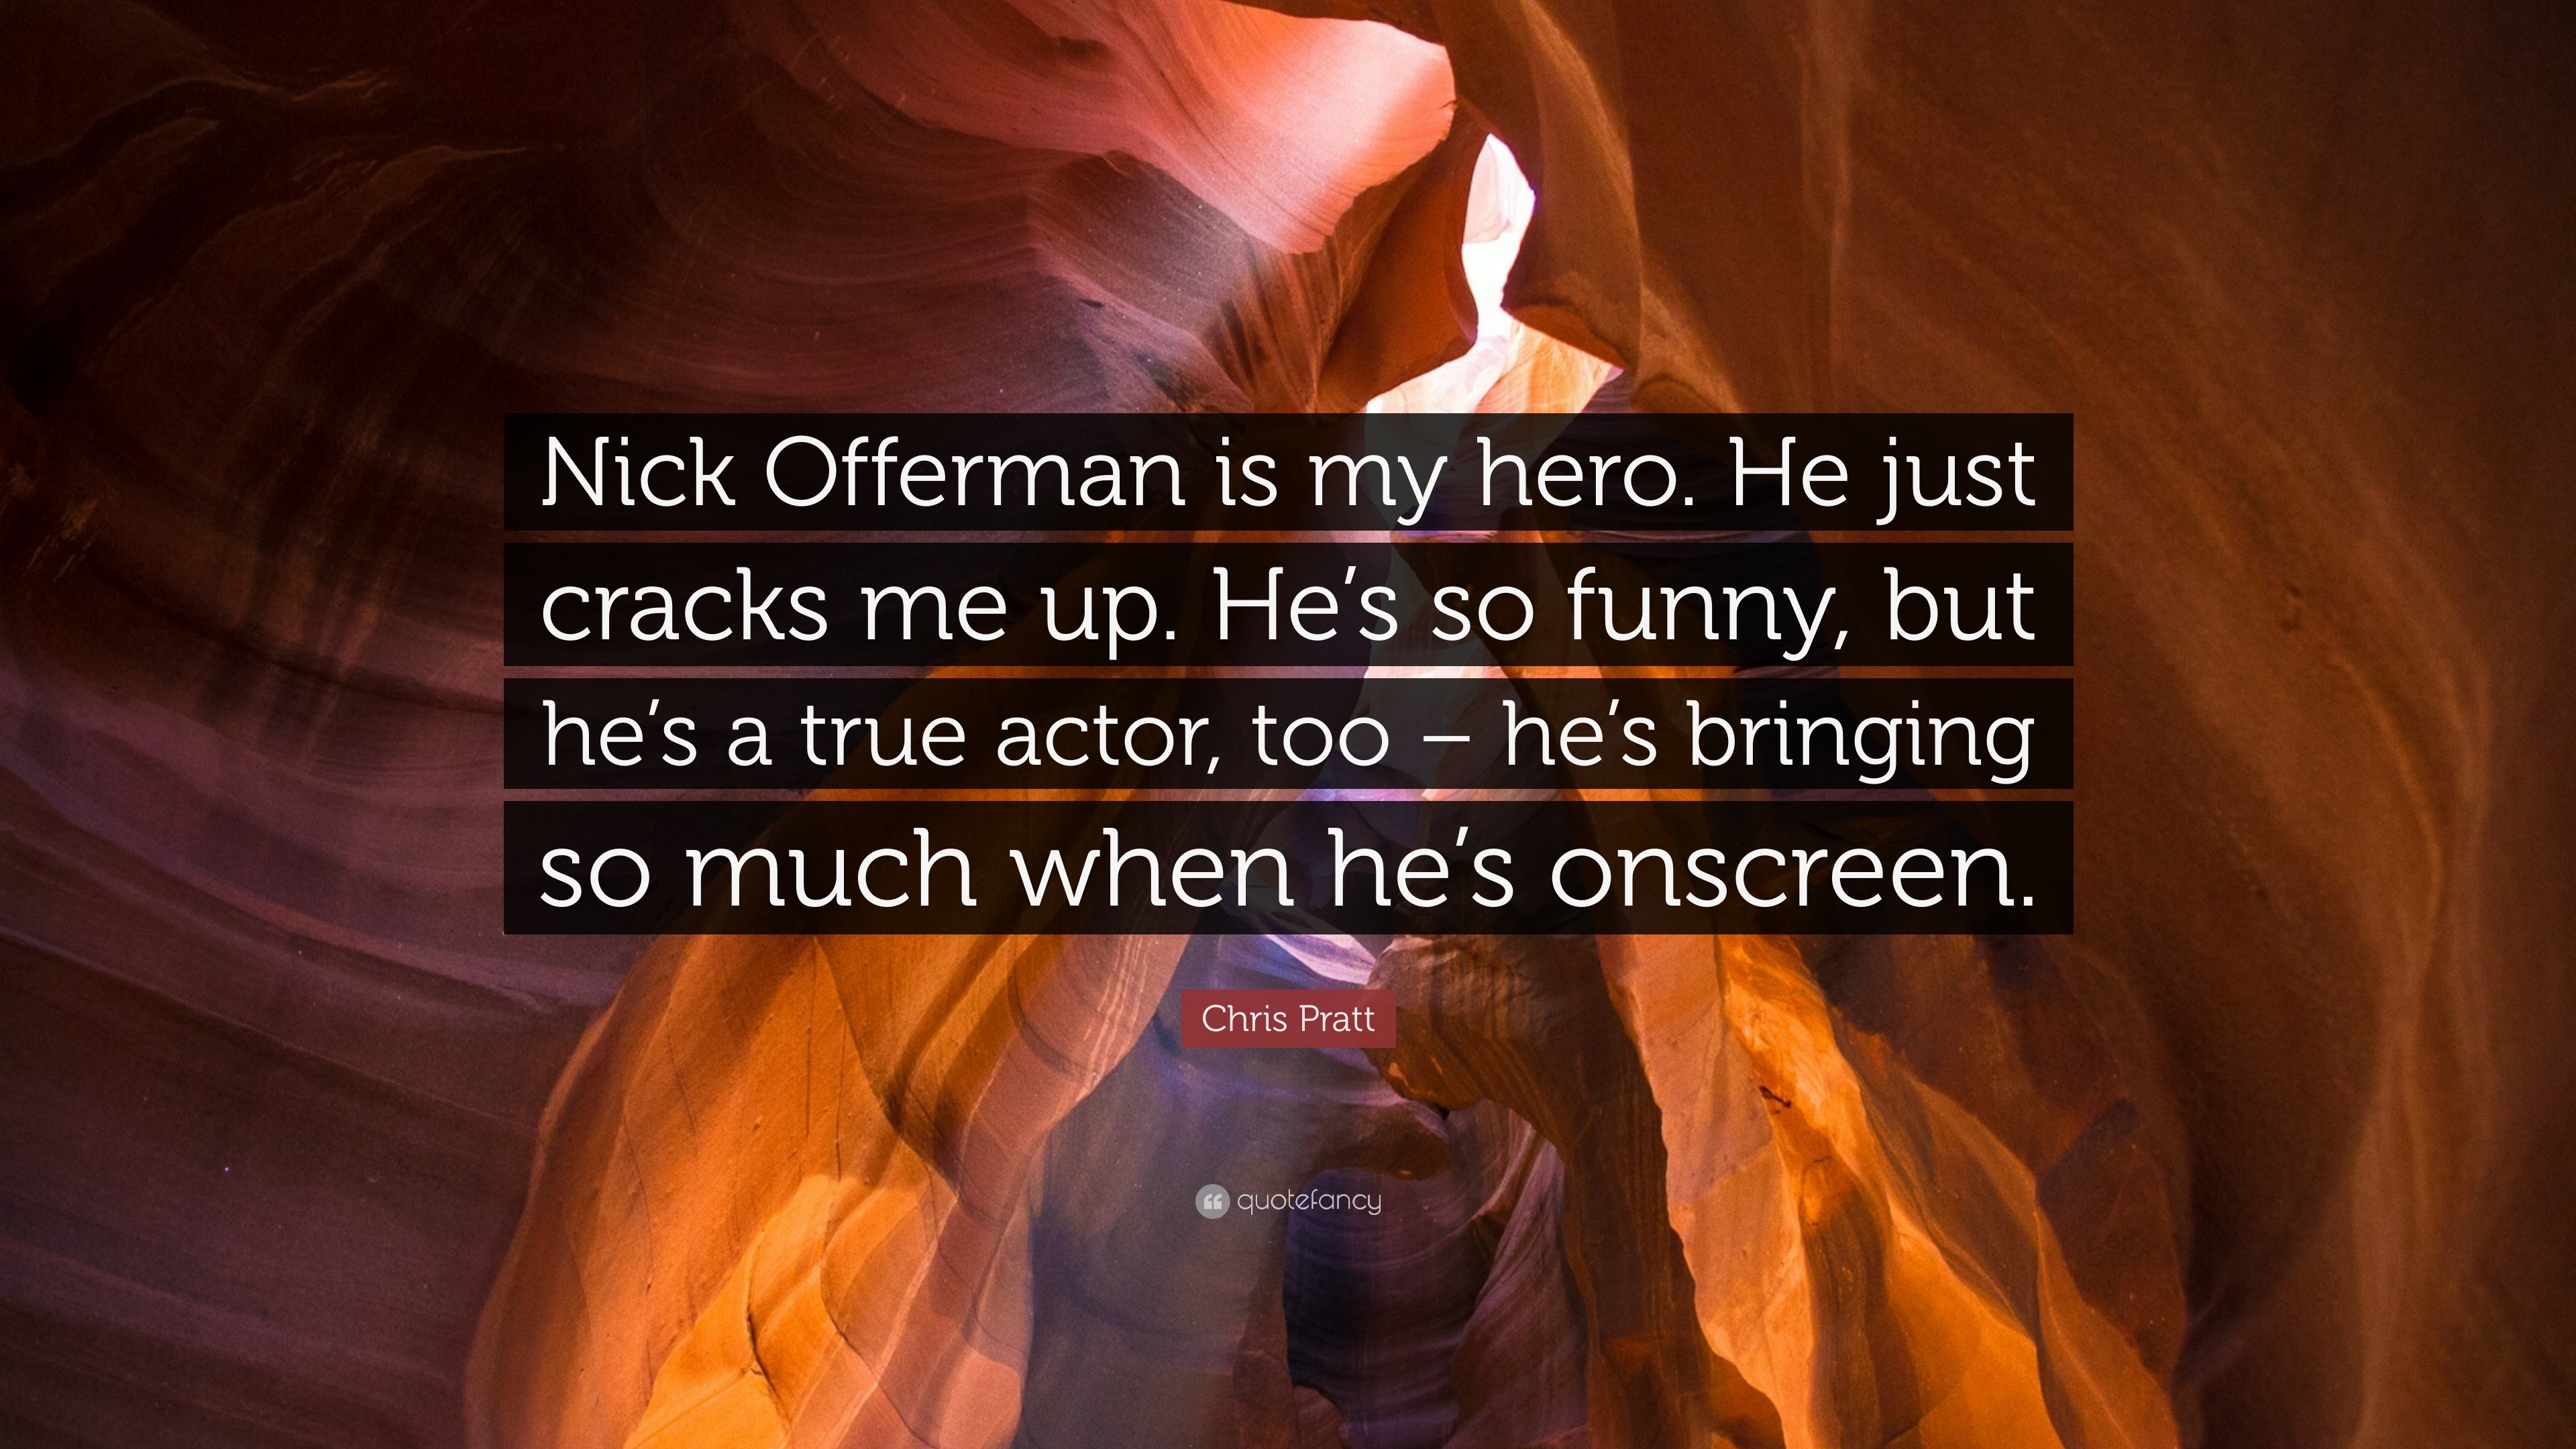 Chris Pratt Quote: “Nick Offerman is my hero. He just cracks me up. He's so  funny, but he's a true actor, too – he's bringing so much when h...”